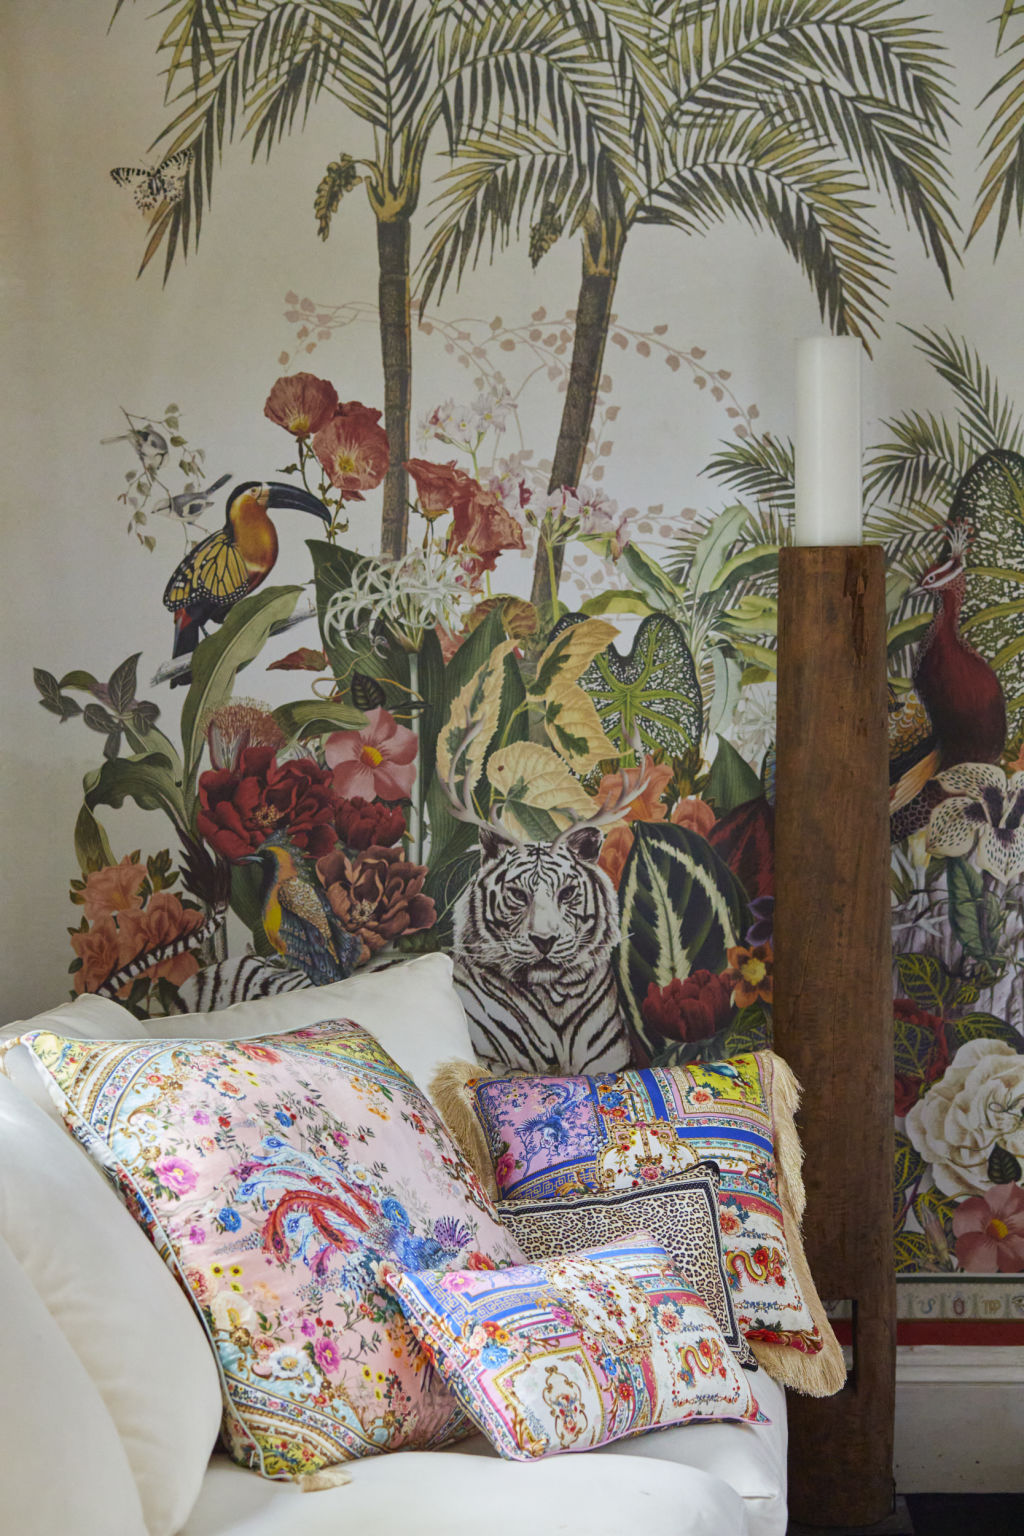 There are prints galore at Franks' colourful home. Photo: Nicky Ryan